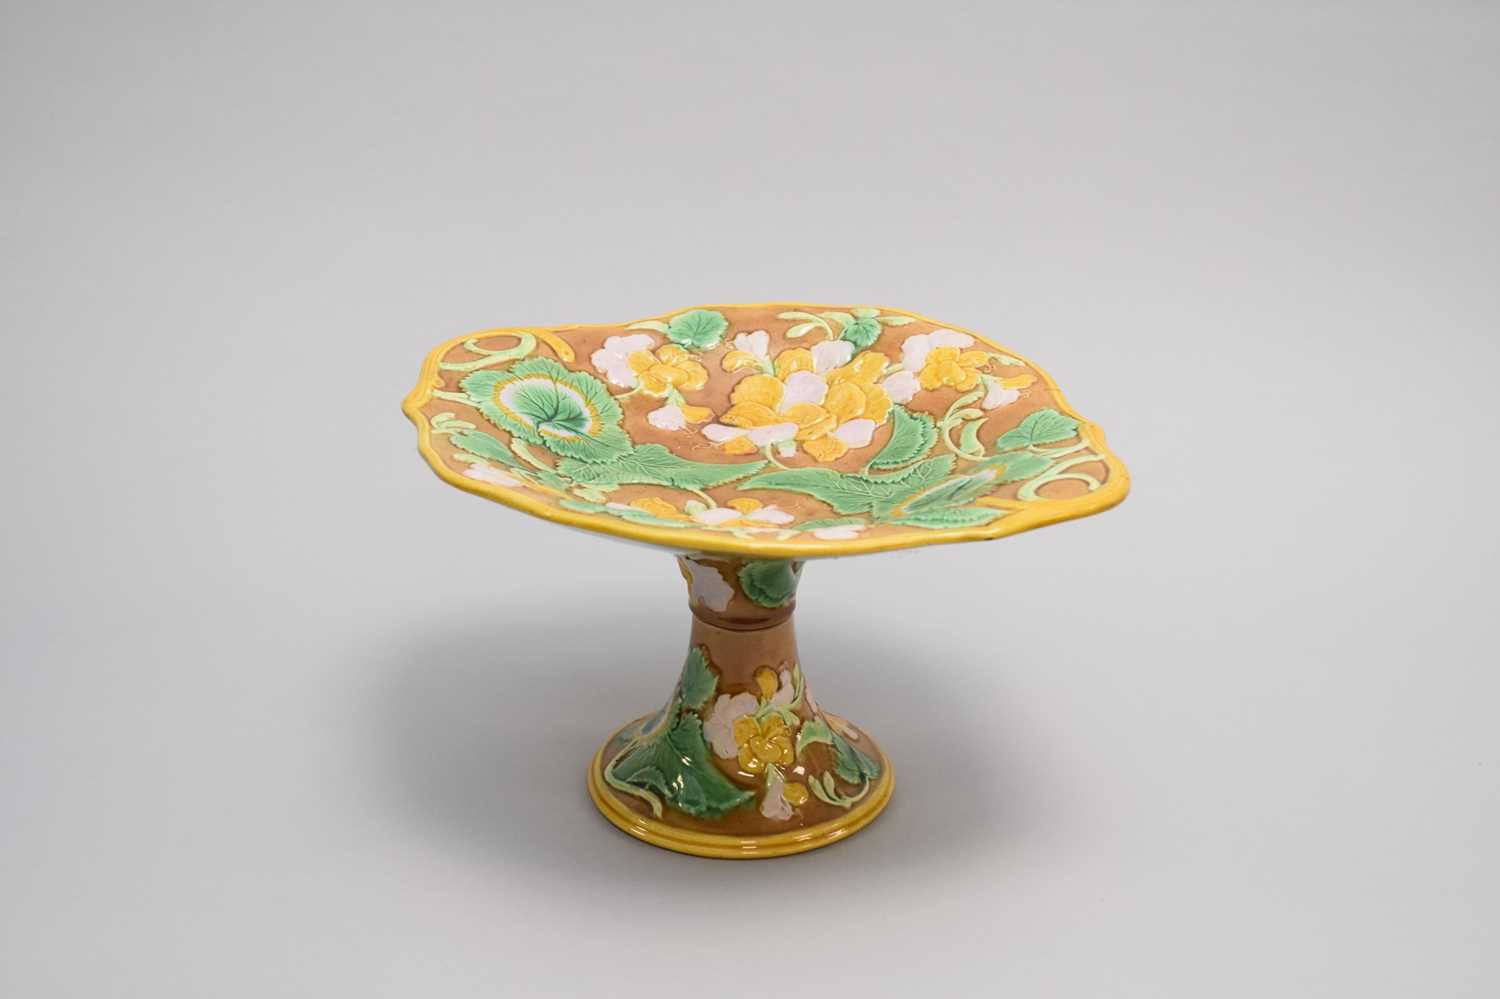 A Wedgwood majolica dish and Continental comport